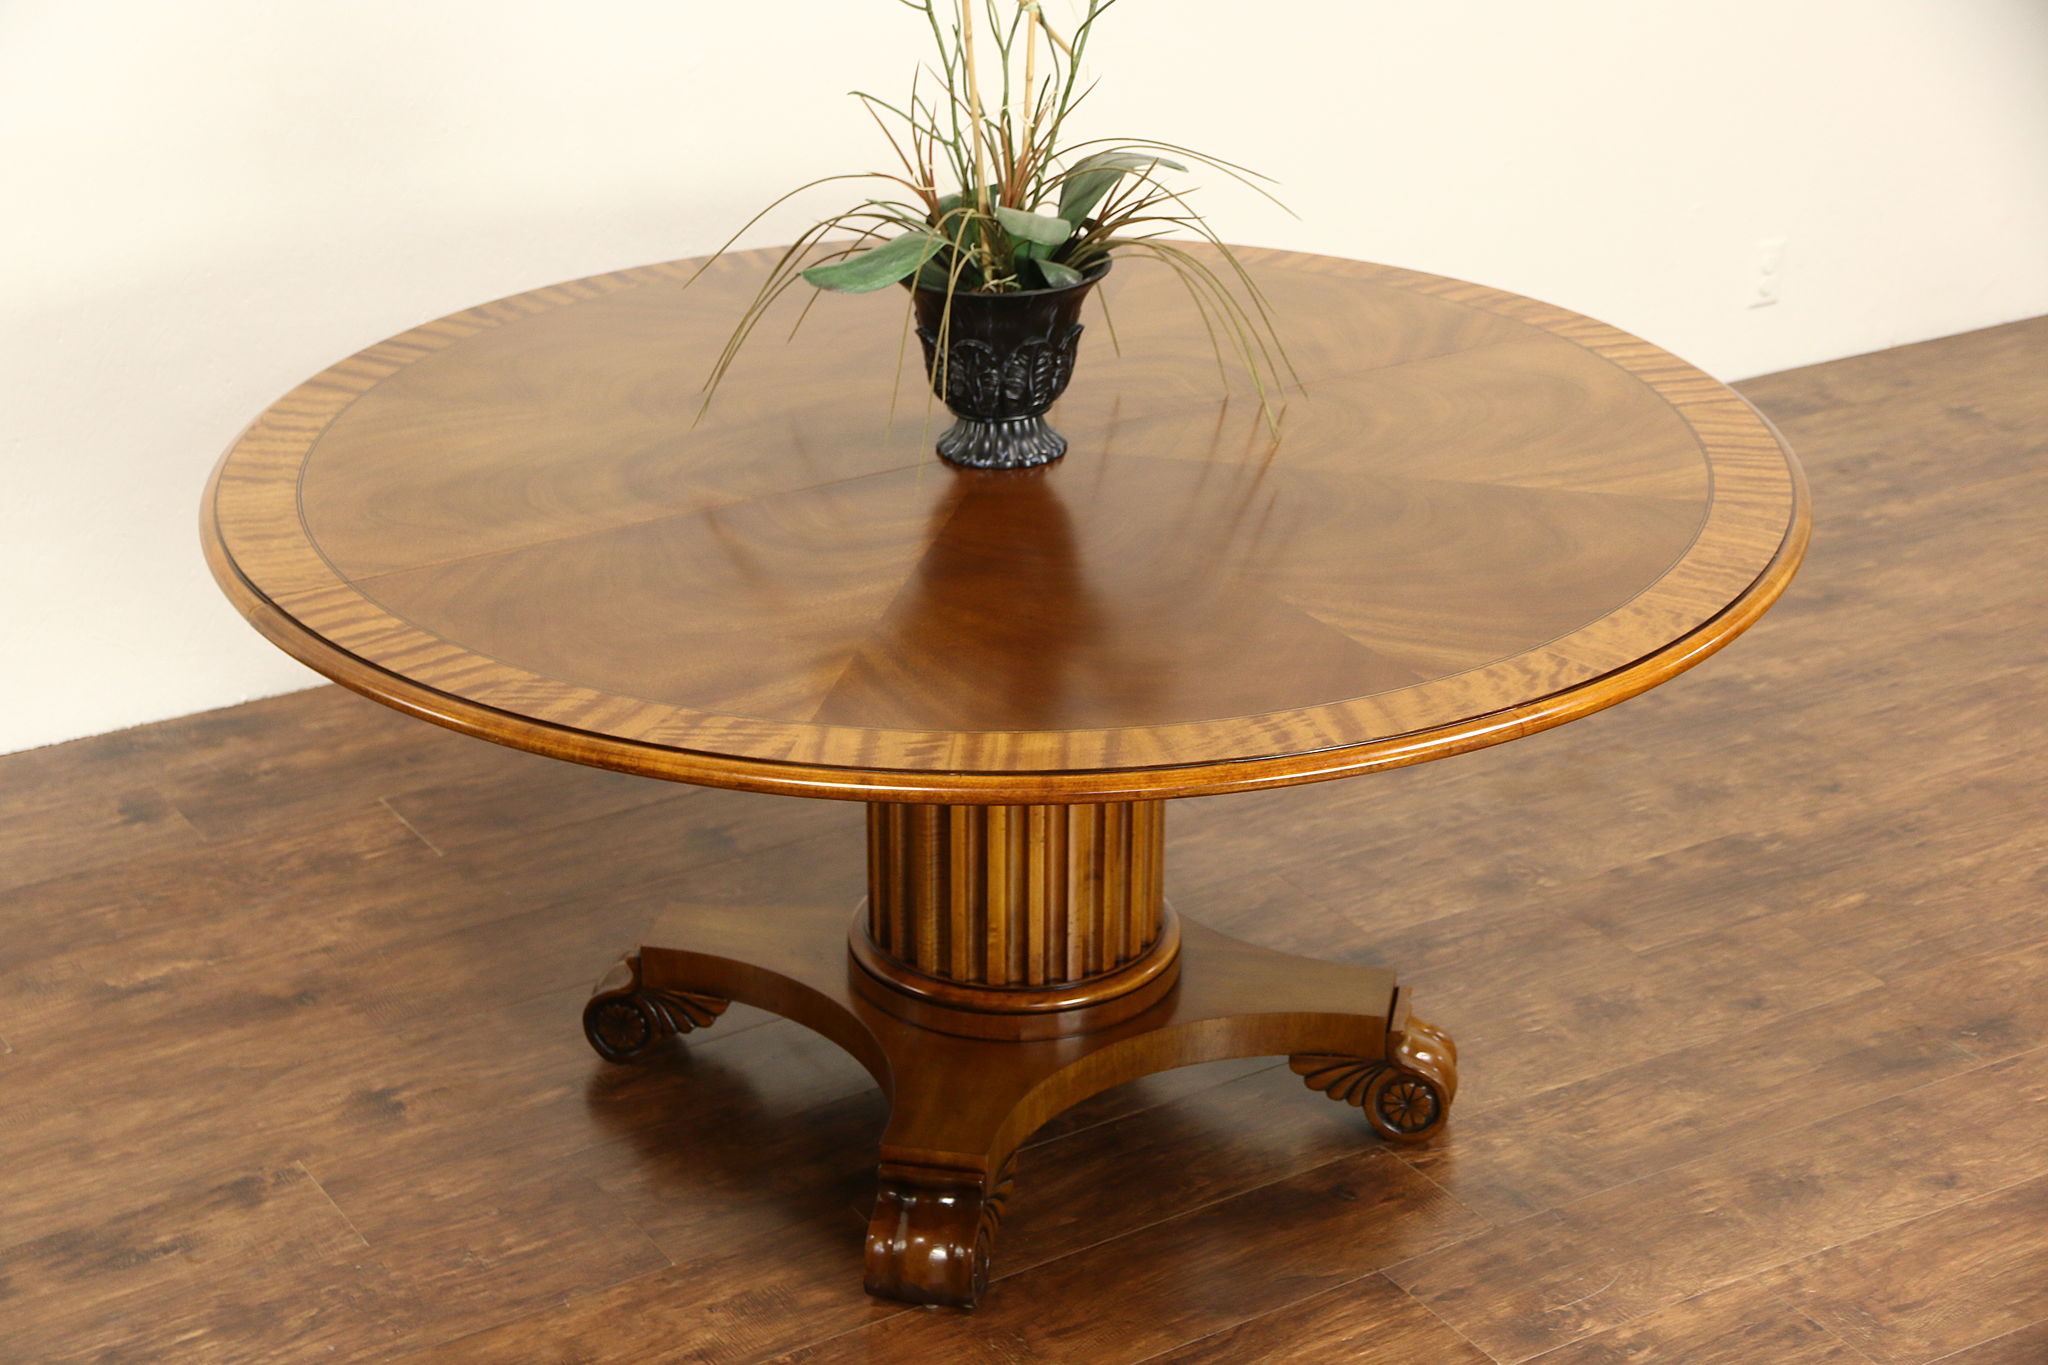 Dazzling henredon round dining table Sold Henredon Round 5 4 Vintage Banded Table Sunburst Top Classical Column Harp Gallery Antiques Furniture